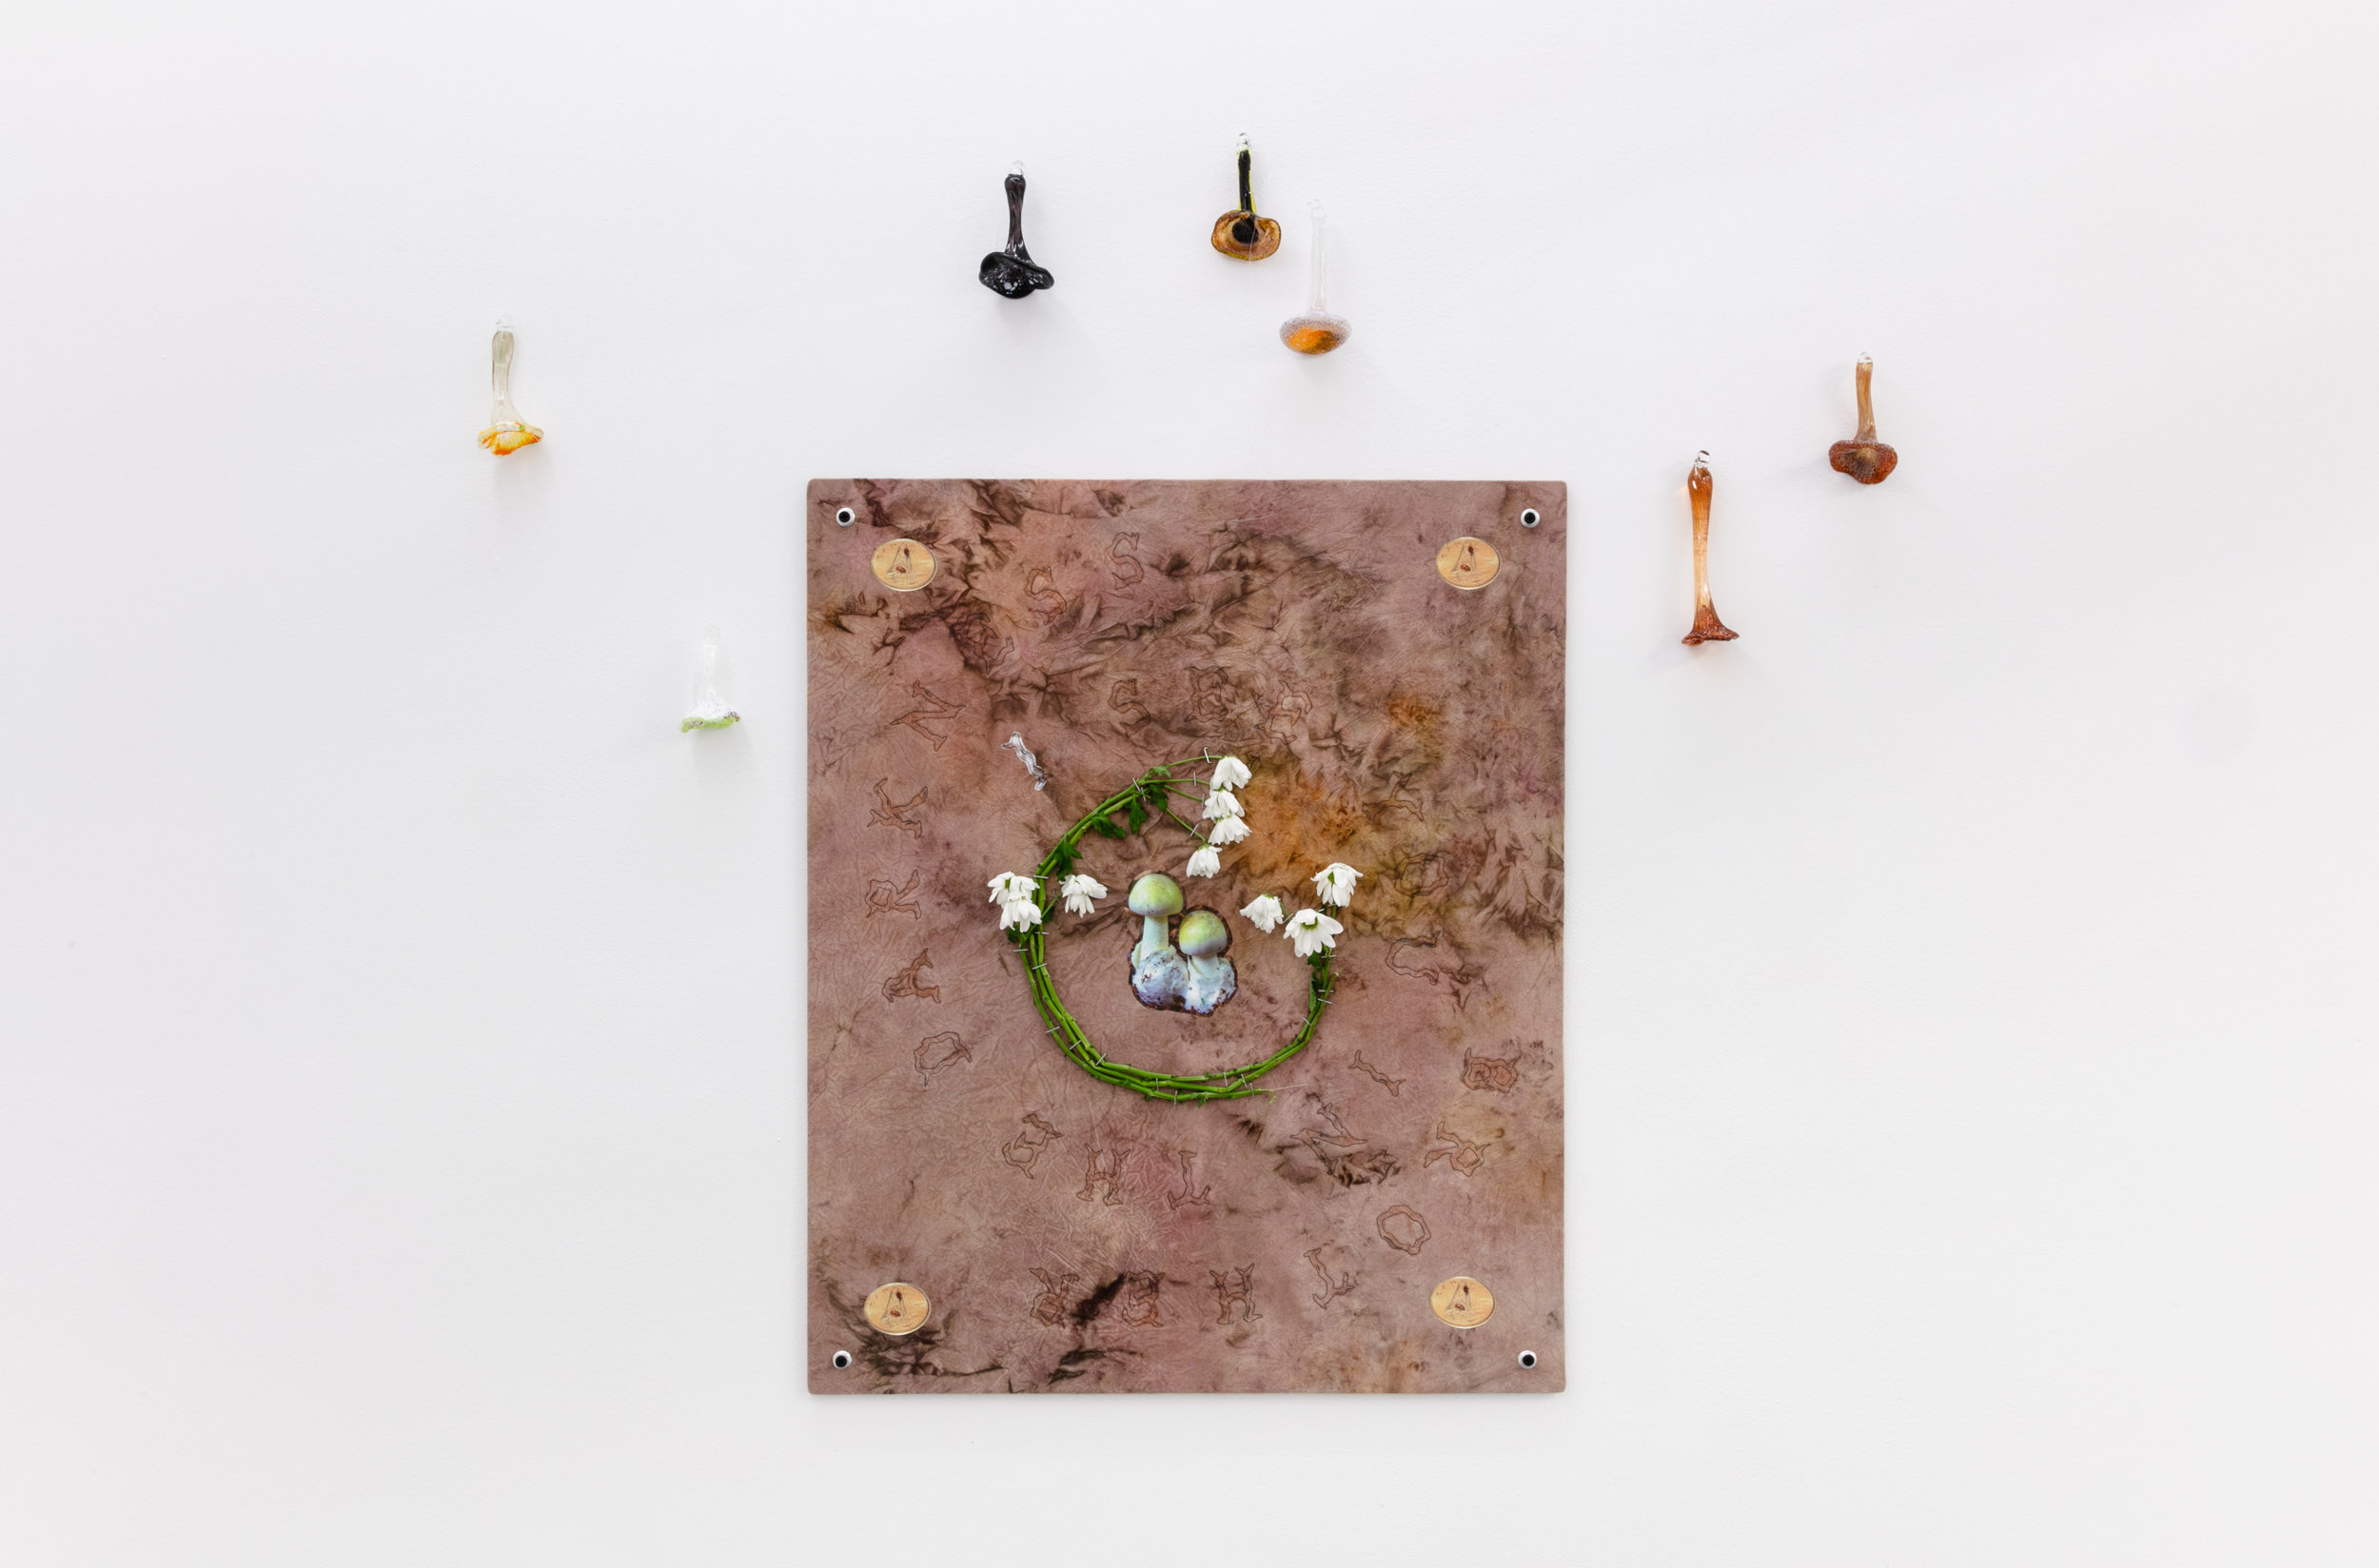  Elif Saydam,  See you in the darkness, brother,  2019 ,  Inkjet transfer, fresh cut flowers, aluminium grommets on dyed canvas, mounted on poplar board 